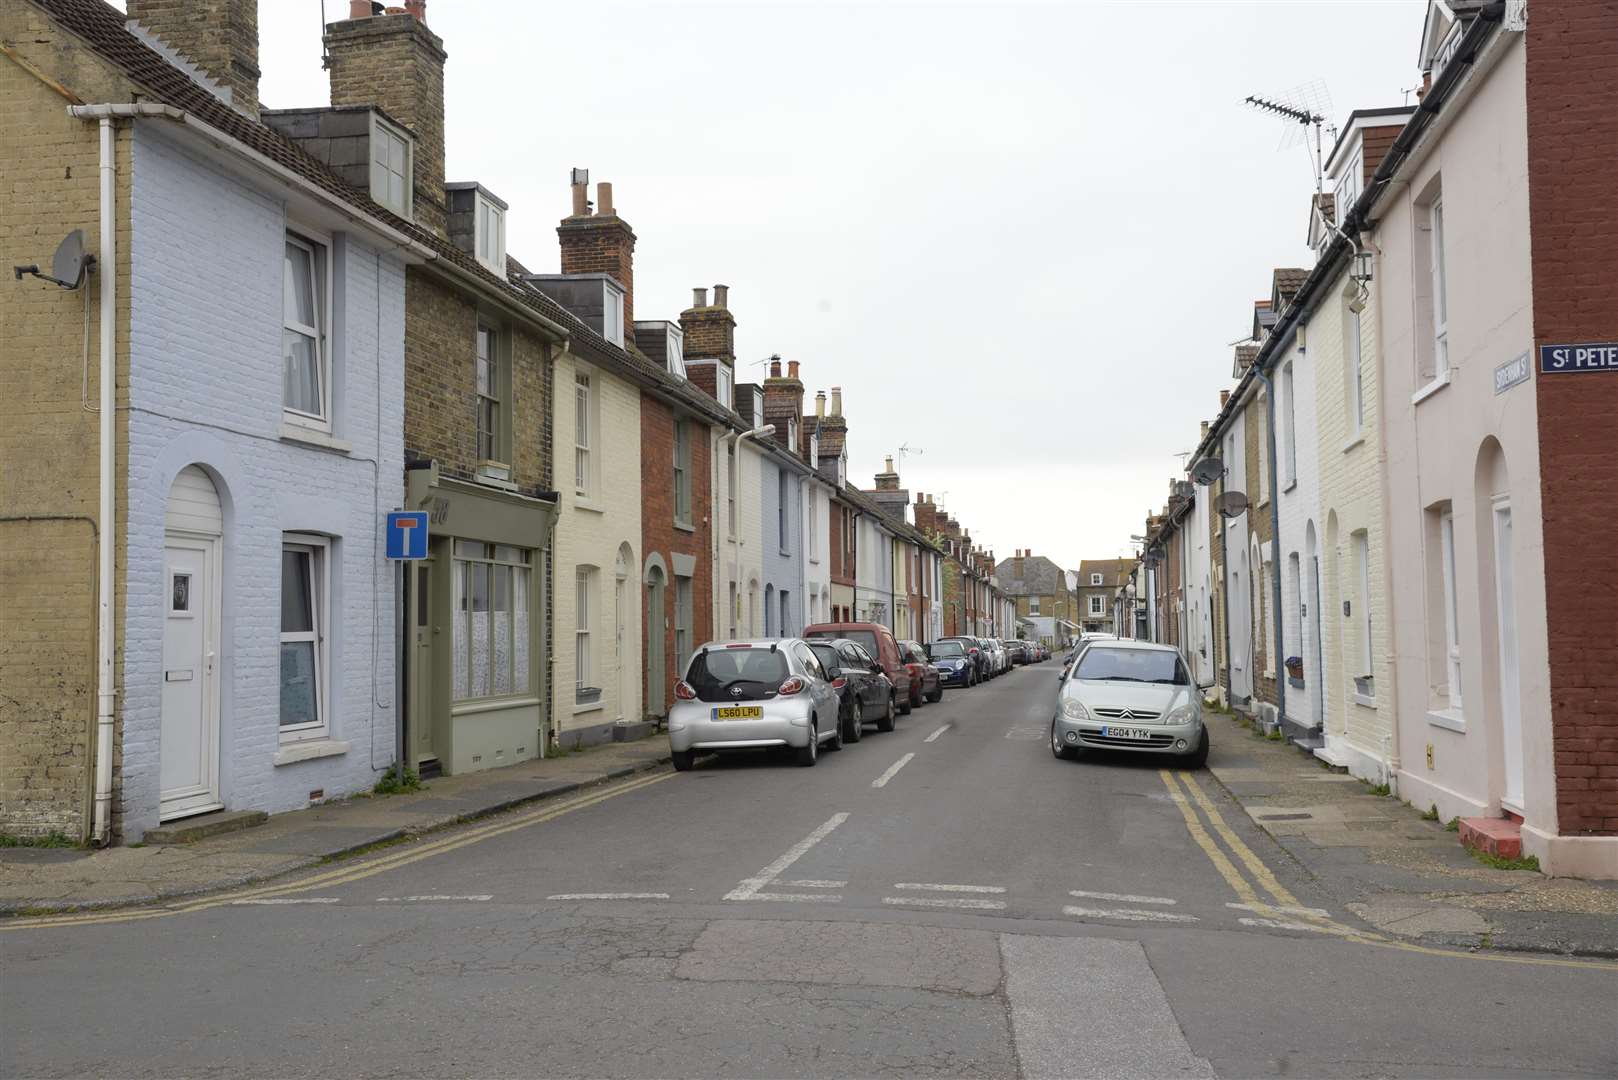 House prices have risen slightly across Kent